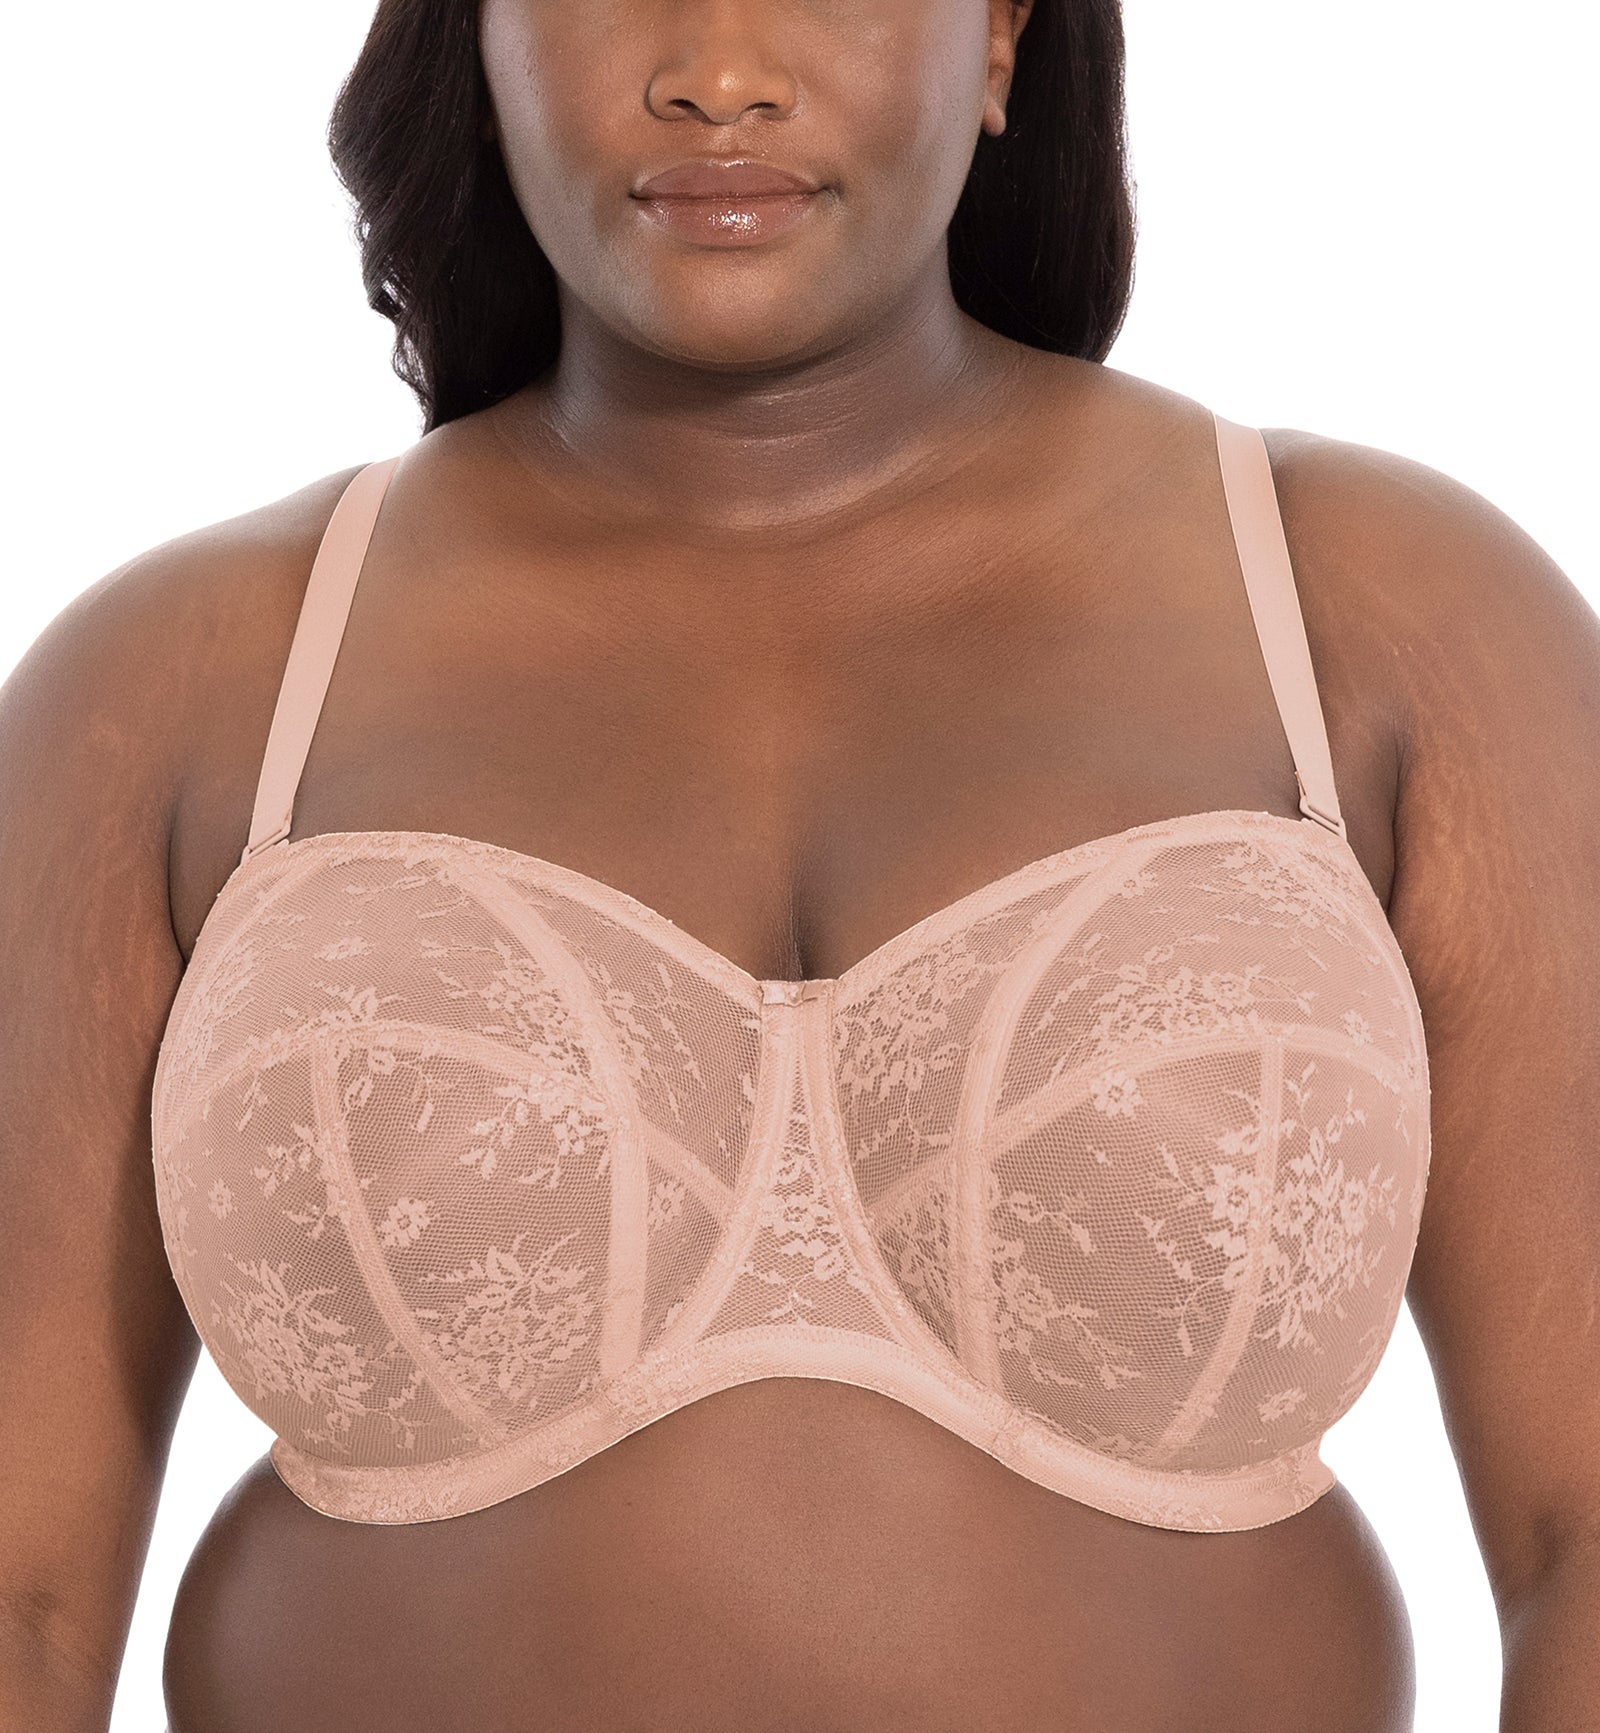 Strapless Bras, Free shipping in the US